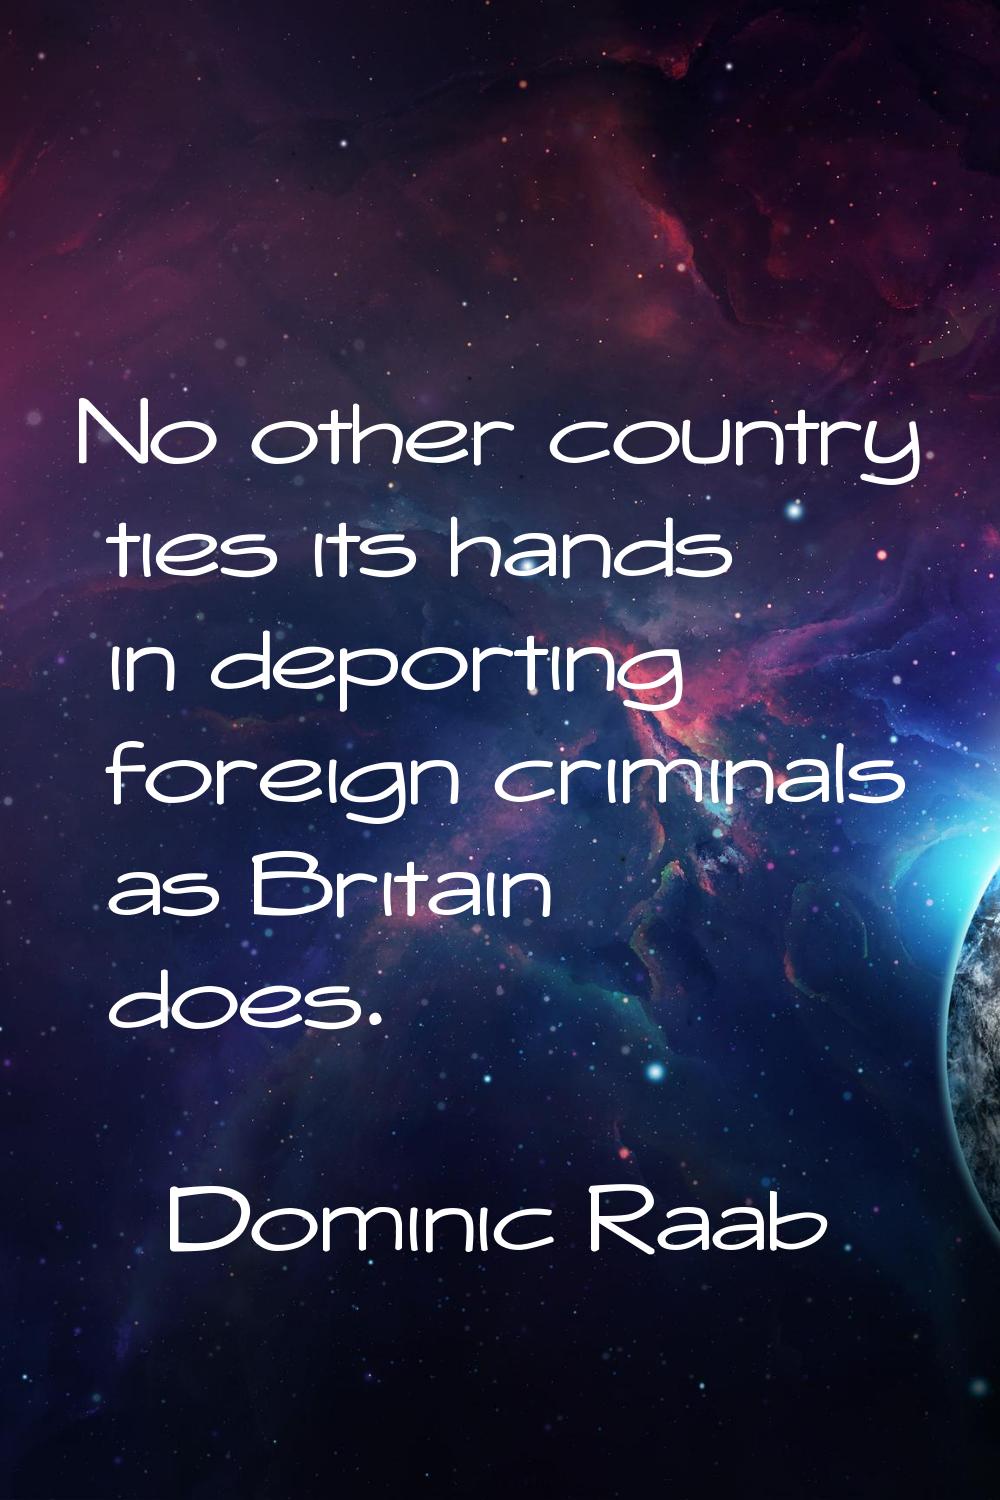 No other country ties its hands in deporting foreign criminals as Britain does.